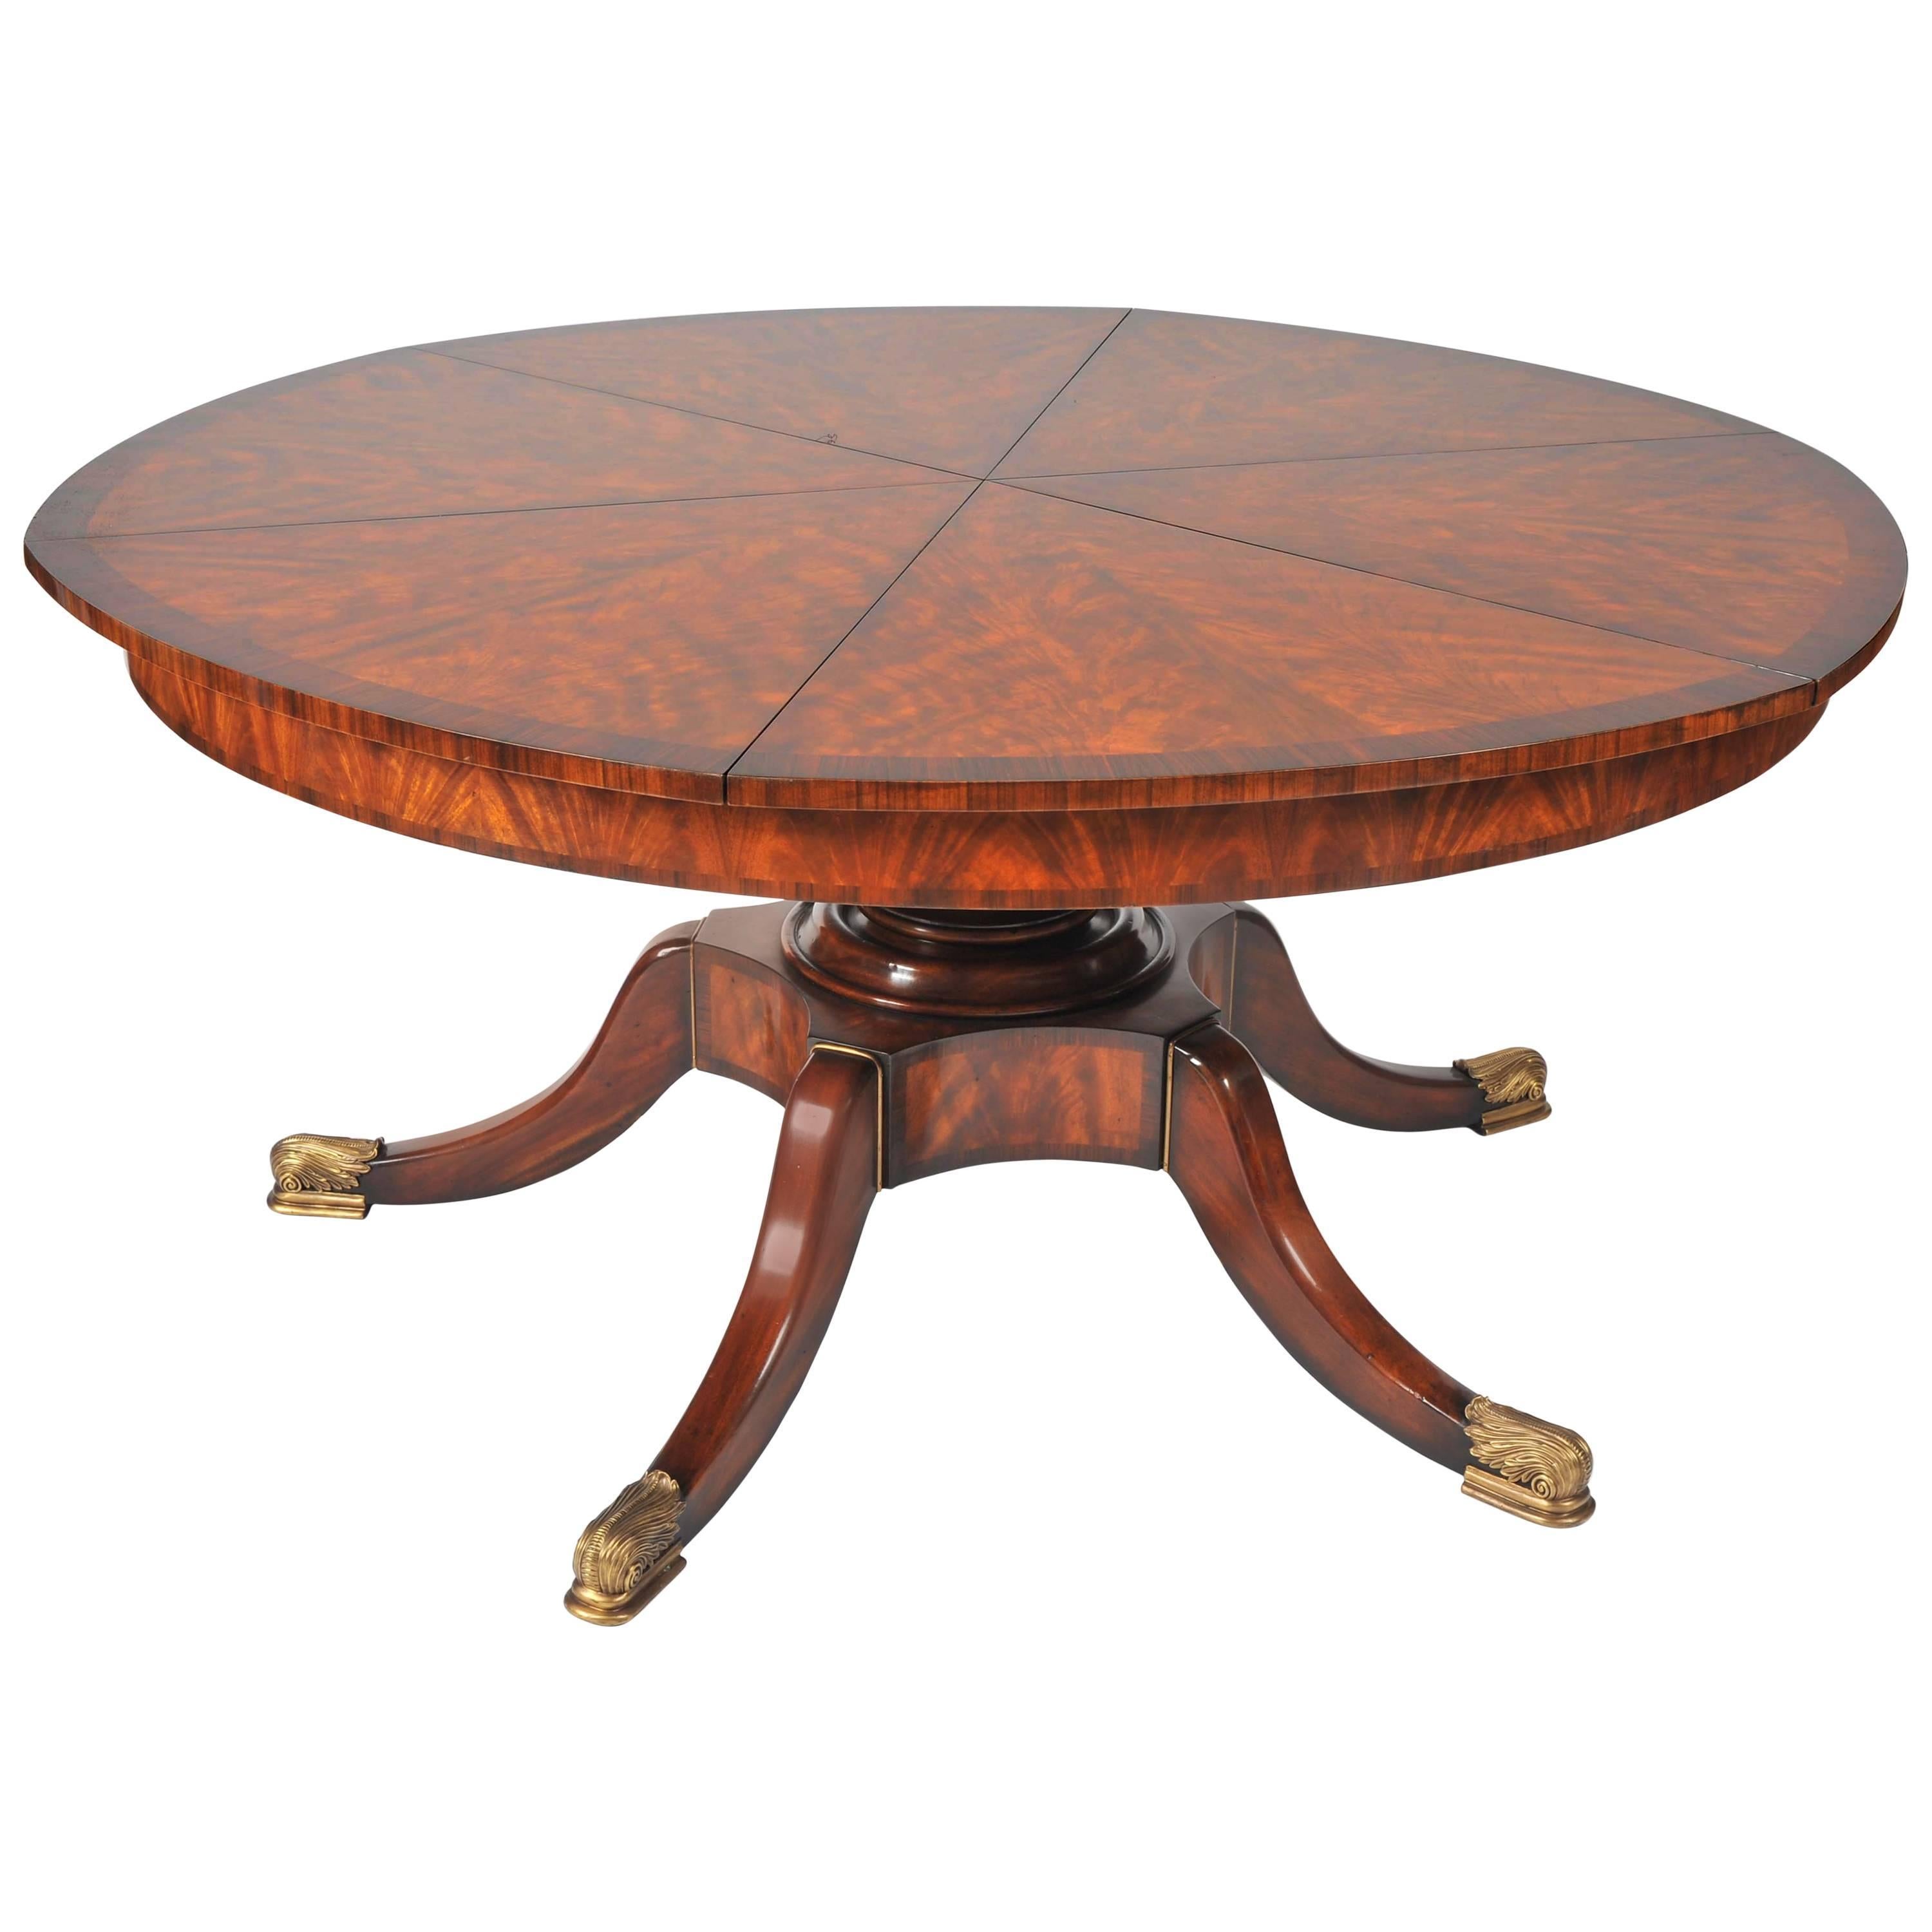 This stunning and beautifully designed flame mahogany segmented circular extending table is in the Regency style, and features leaves that are internally stored. When the table sections are pulled out, it reveals the leaves set inside, and can then